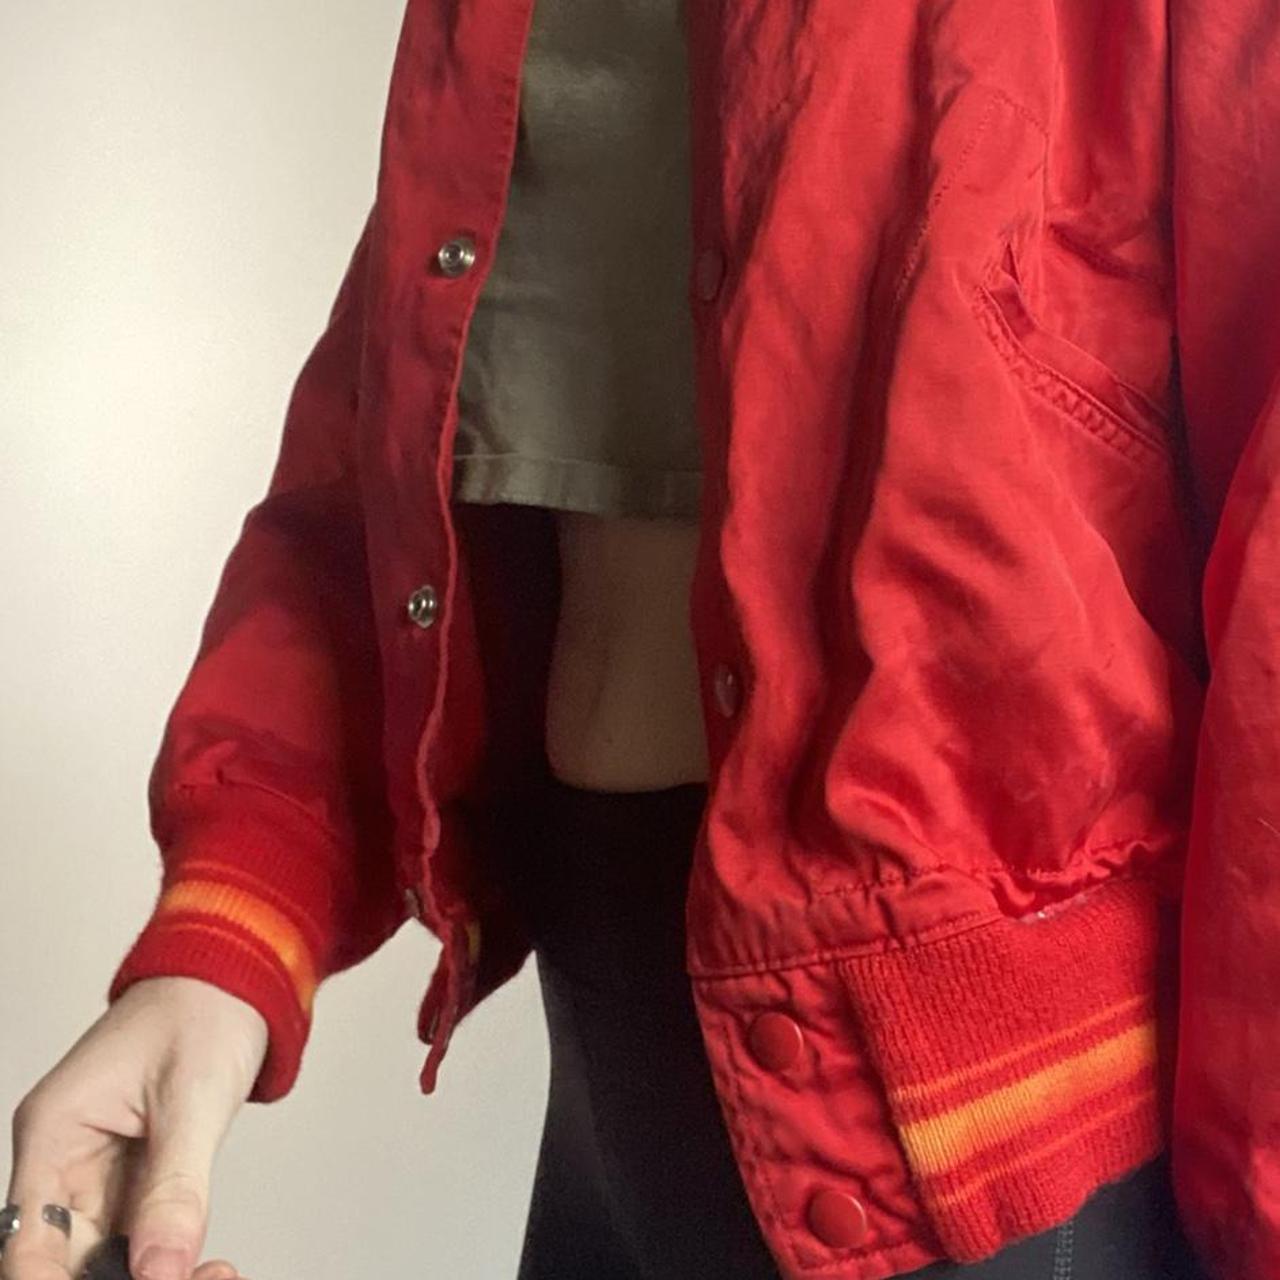 Product Image 4 - Red Bomber Jacket!

In great condition!

msg